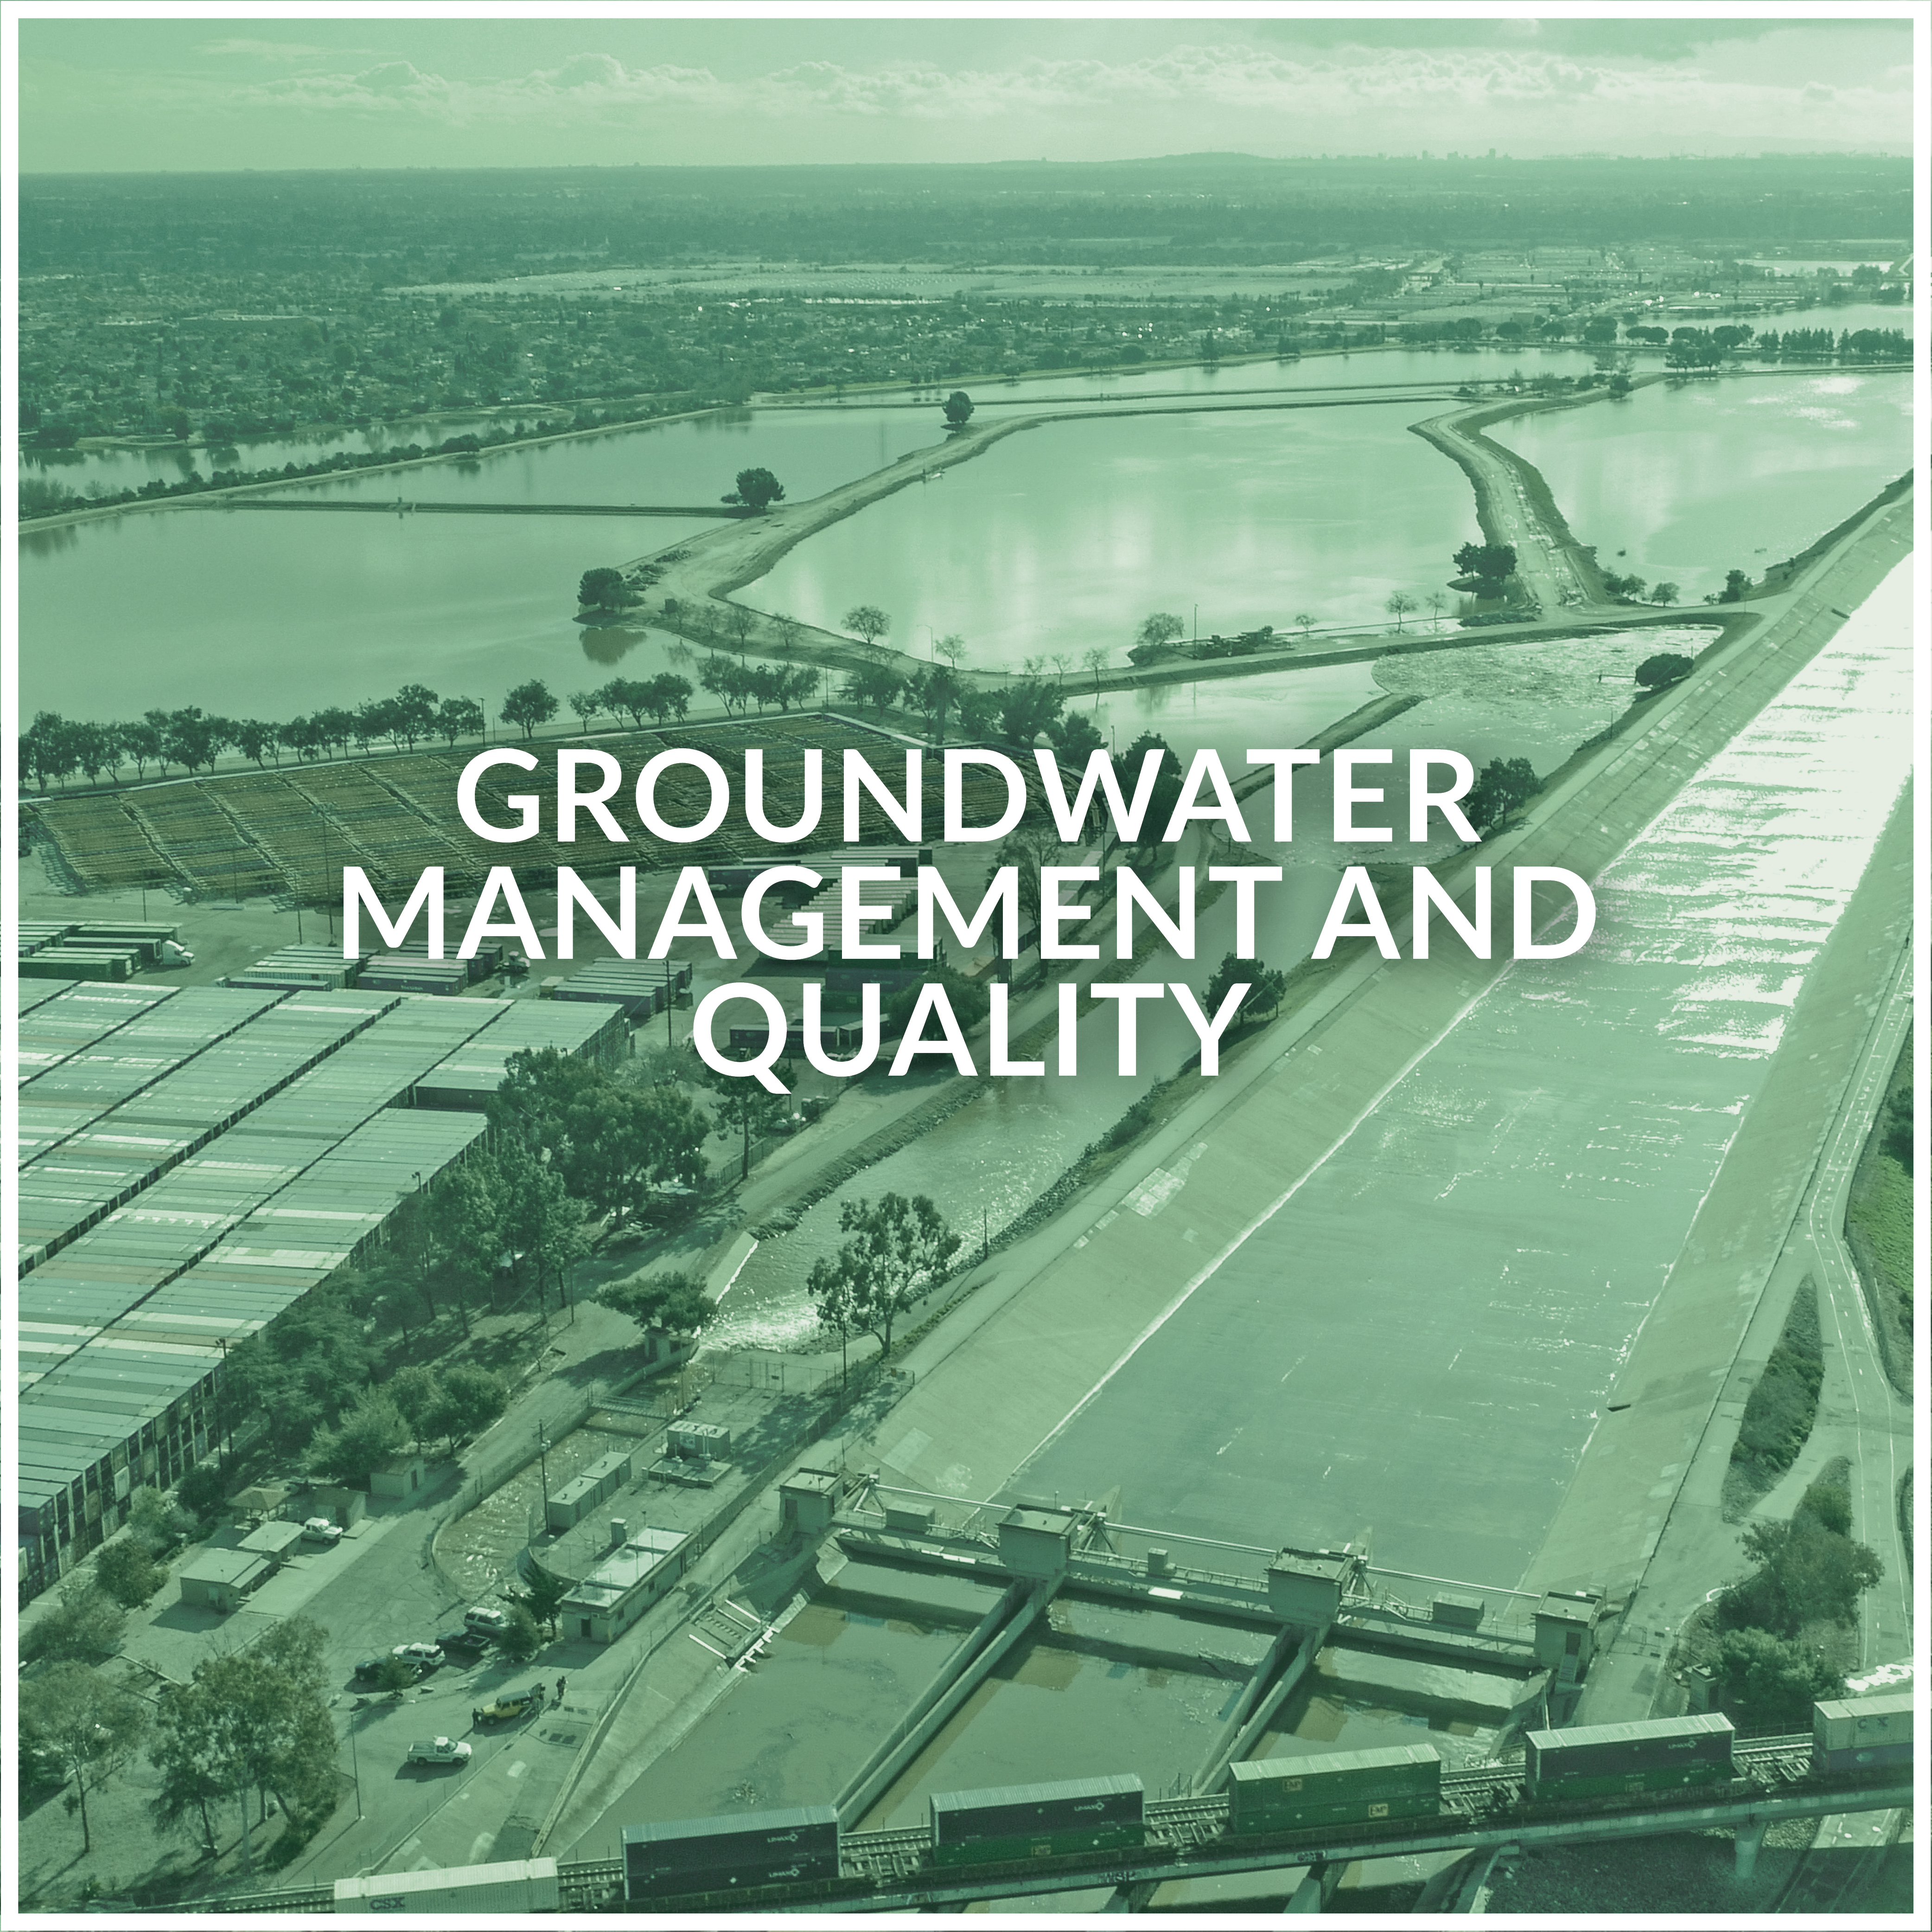 Groundwater management and quality button with a green hue and a picture of a groundwater recharge basin with the following information on the back: ‘Realizing our shared groundwater management opportunities by sharing expertise and resources to overcome challenges.’ 